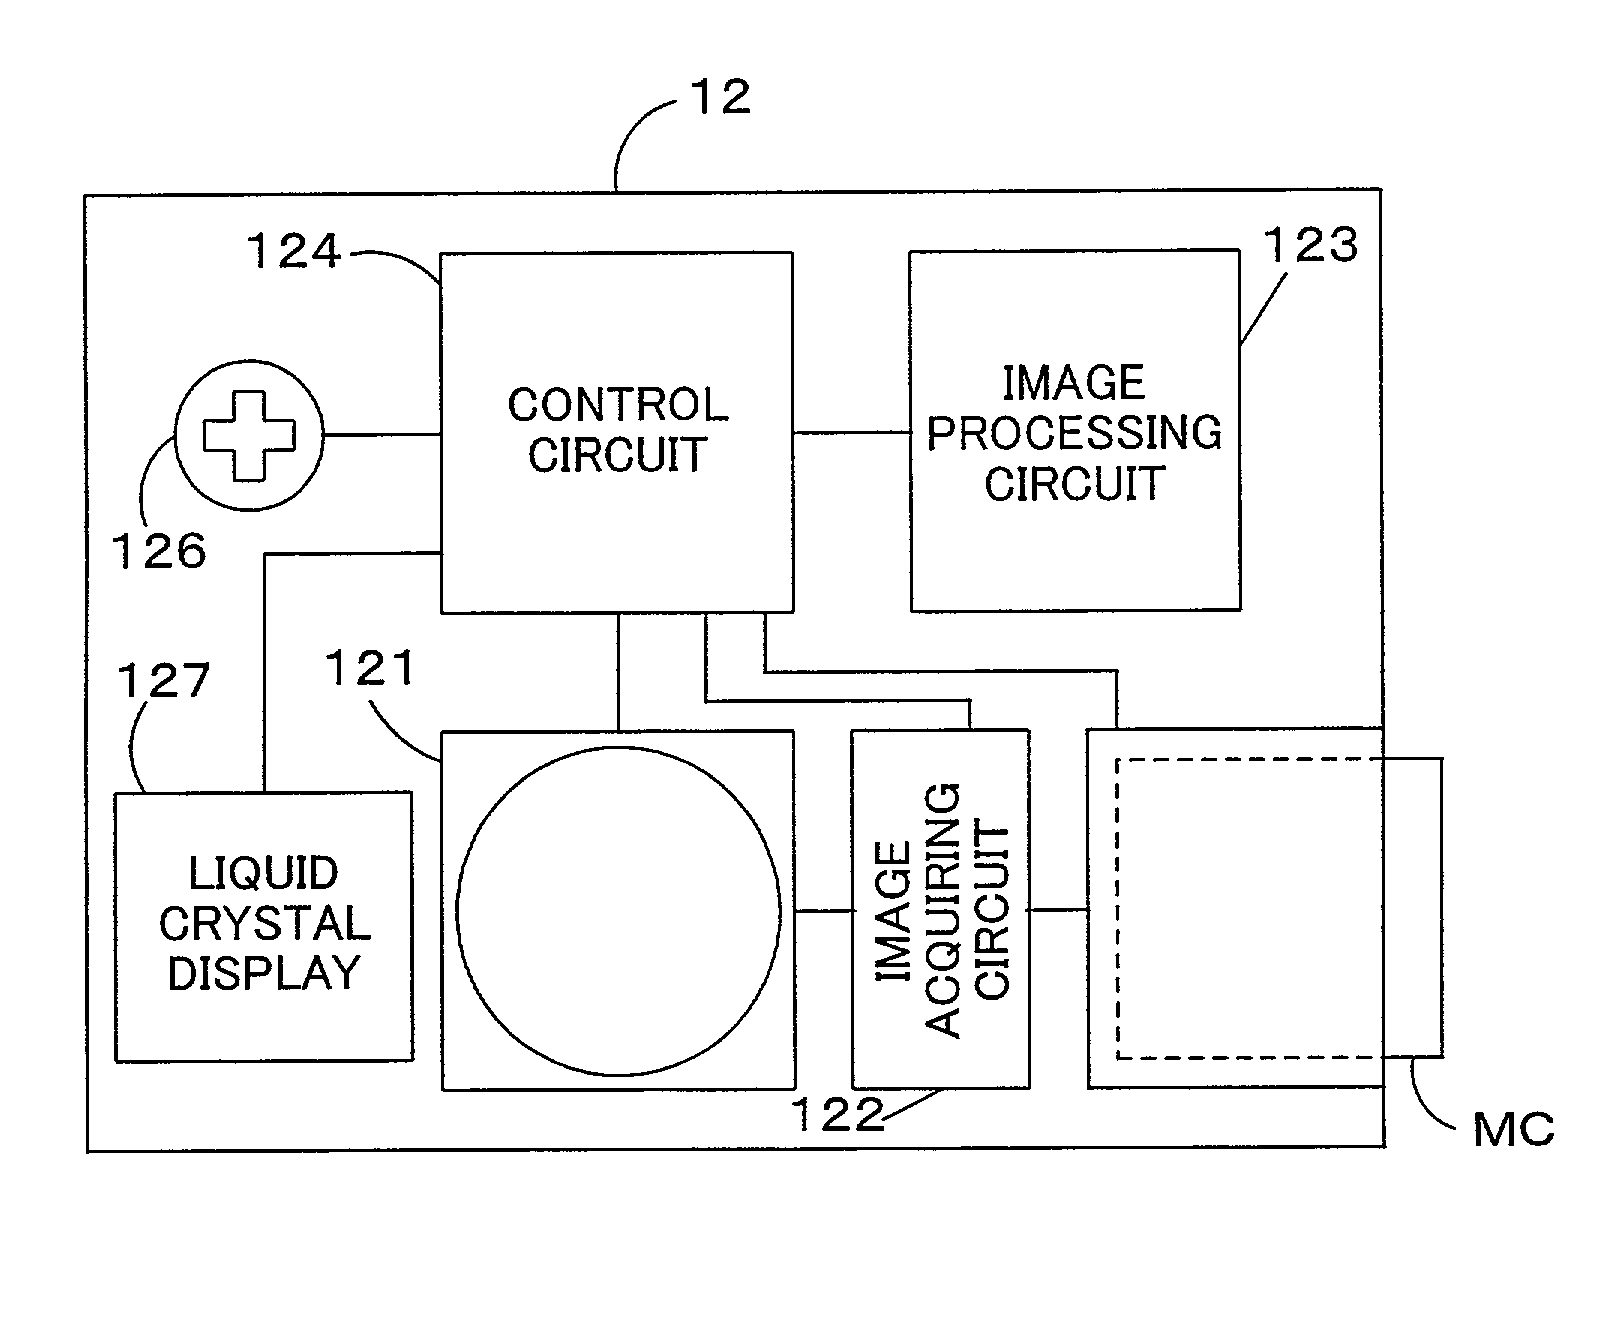 Output image adjustment method, apparatus and computer program product for graphics files